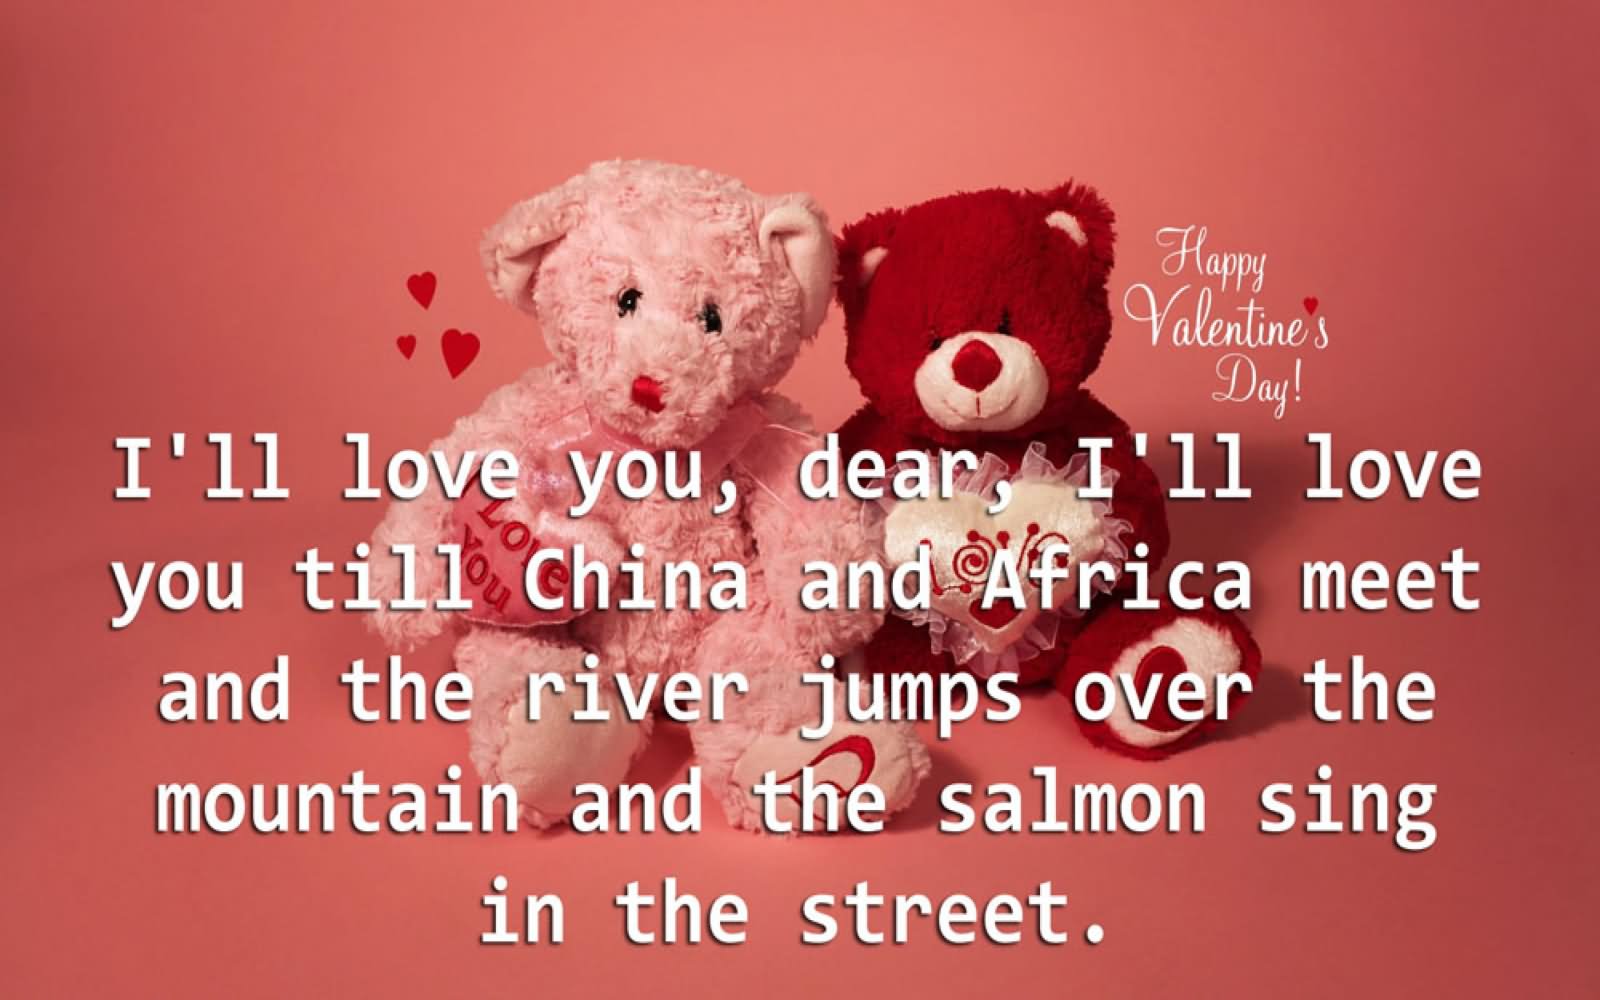 I'll love you till China and Africa meet and the river jumps over the mountain and the salmon sing in the street. - W. H. Aude